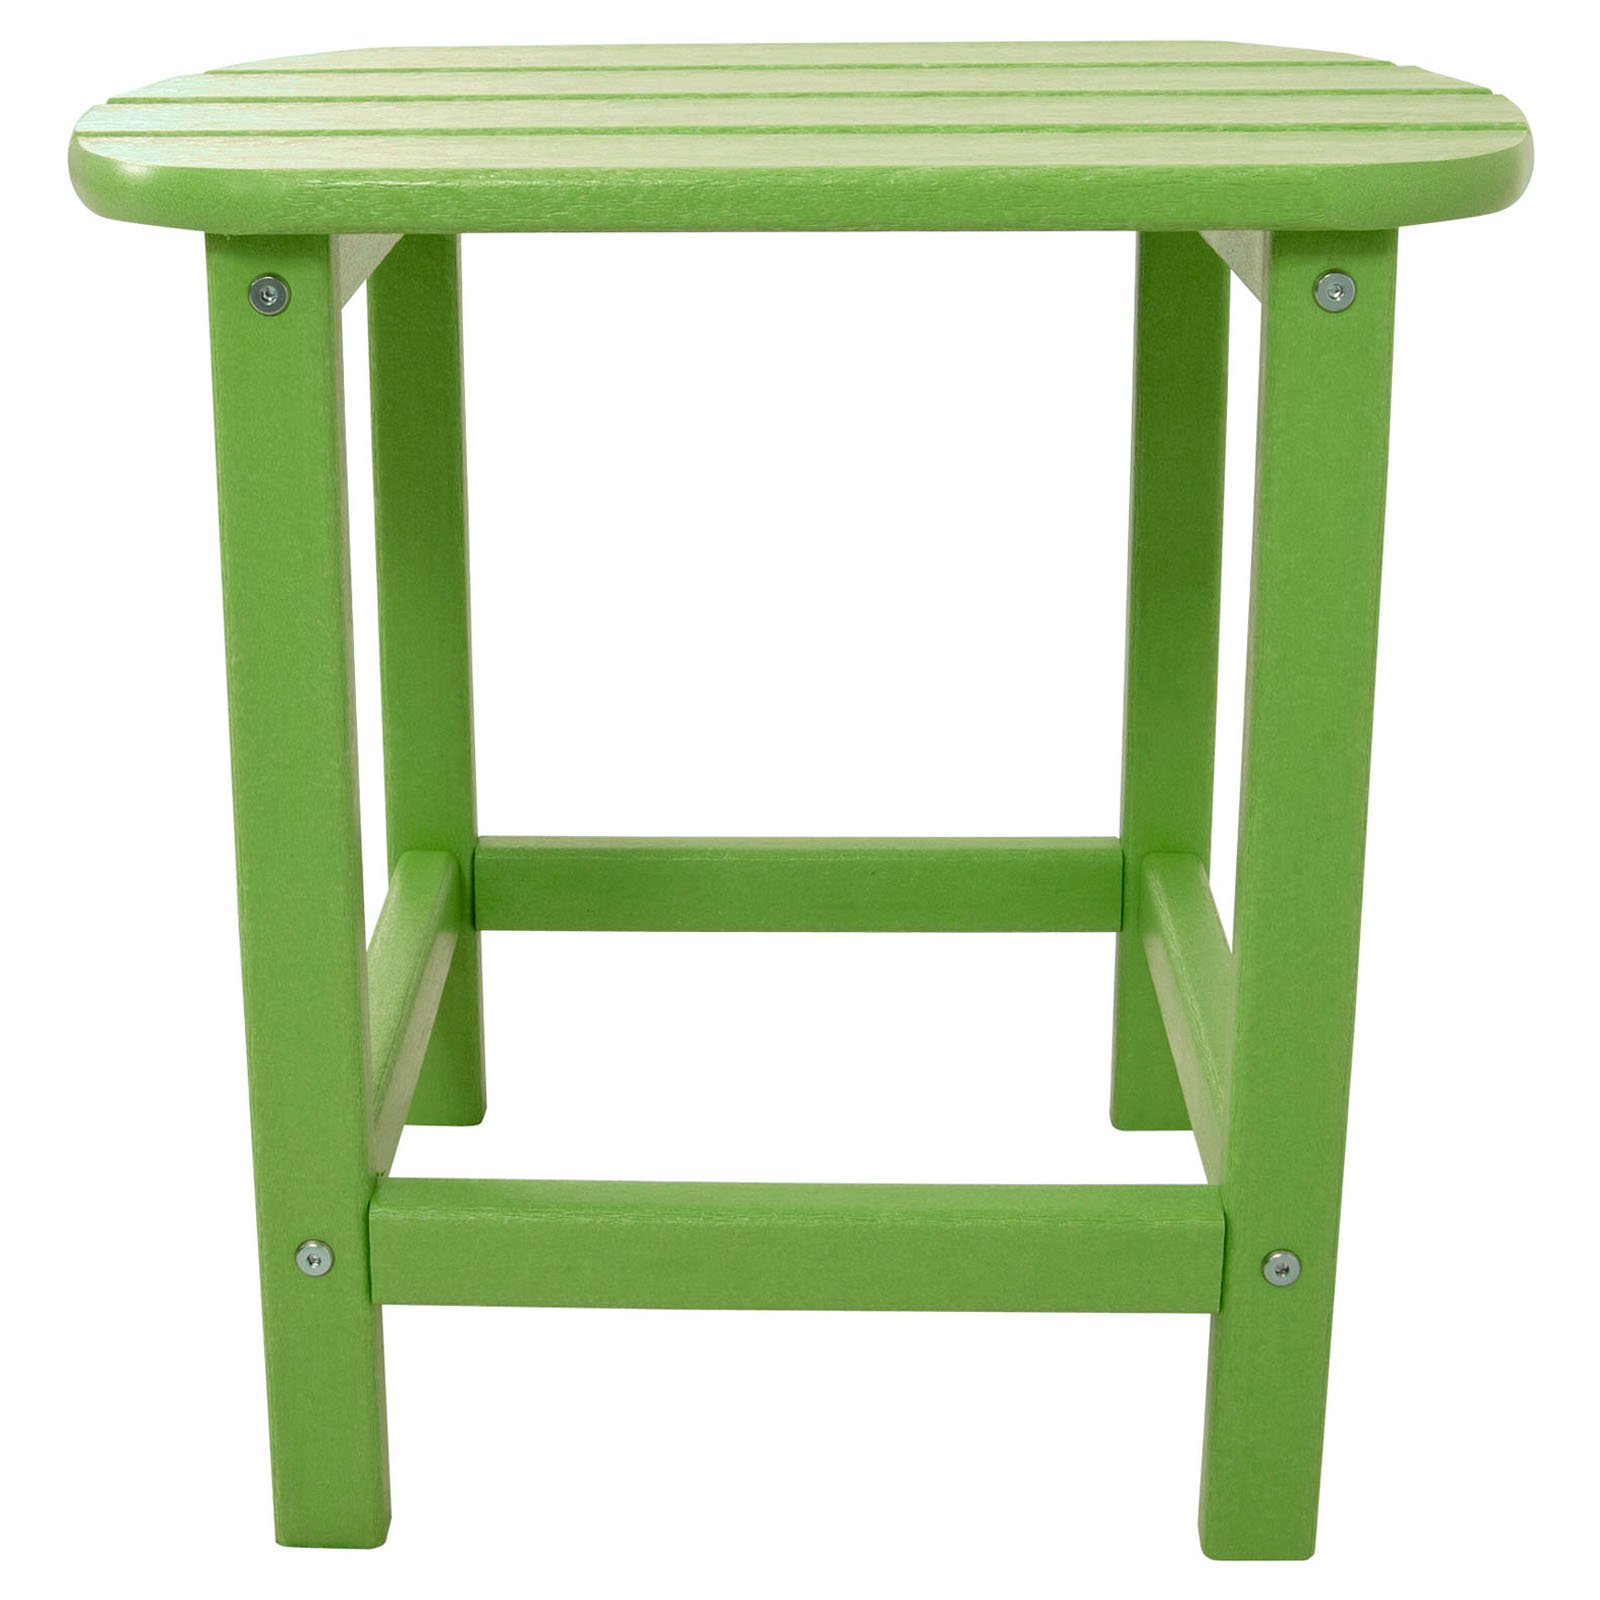 Hanover Outdoor All-Weather Side Table - image 4 of 11